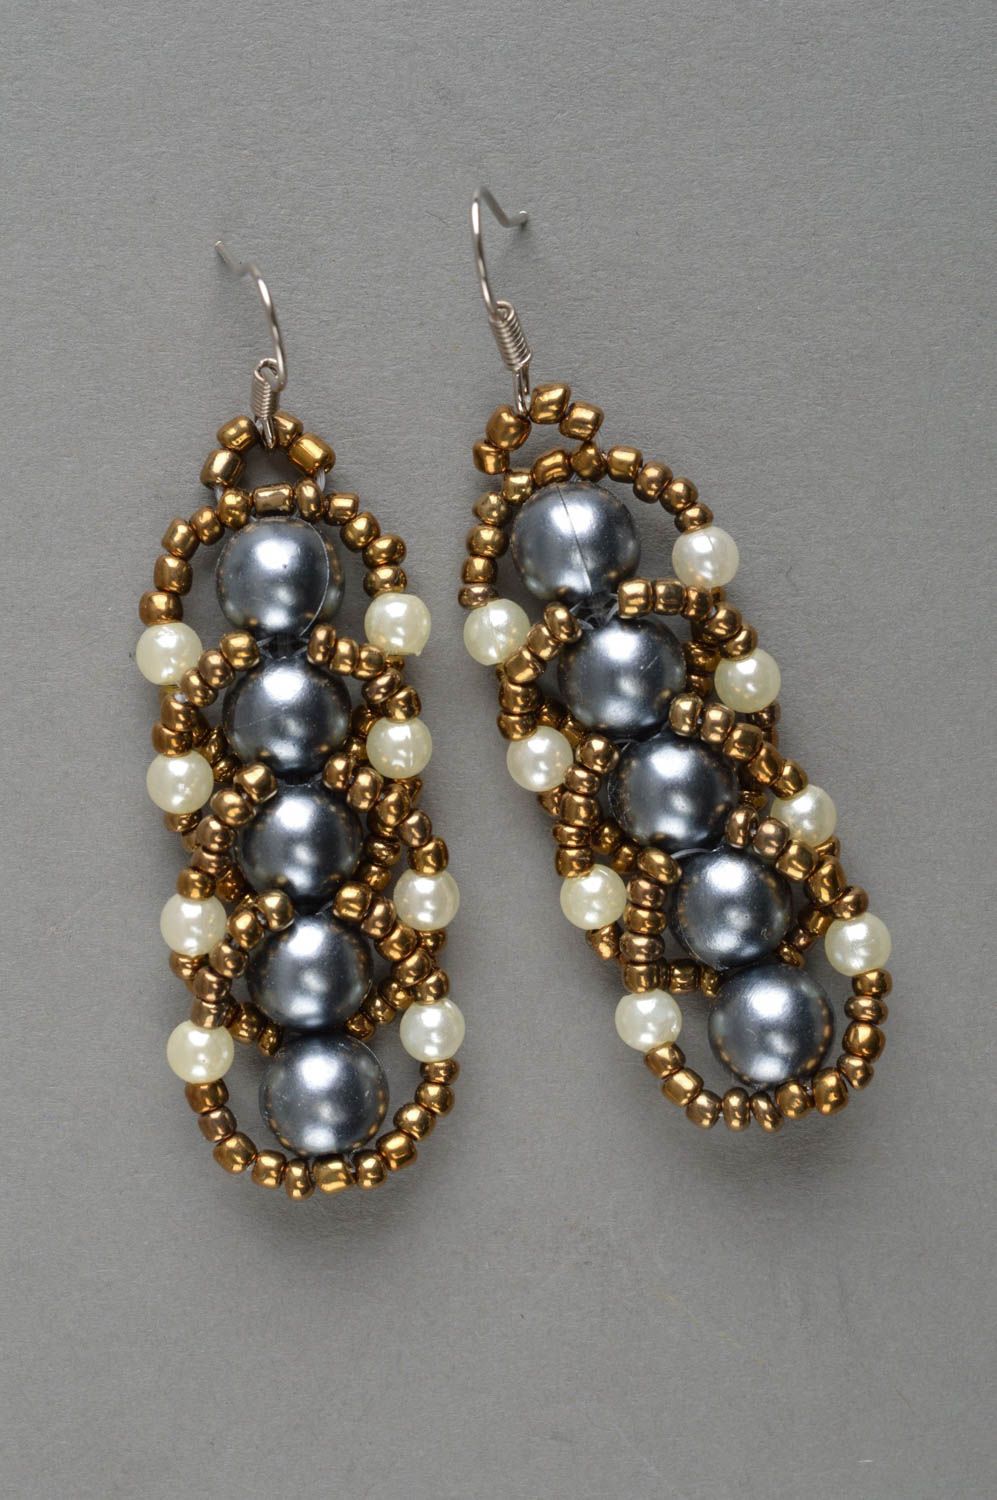 Unusual homemade beaded earrings evening jewelry beadwork ideas gifts for her photo 2